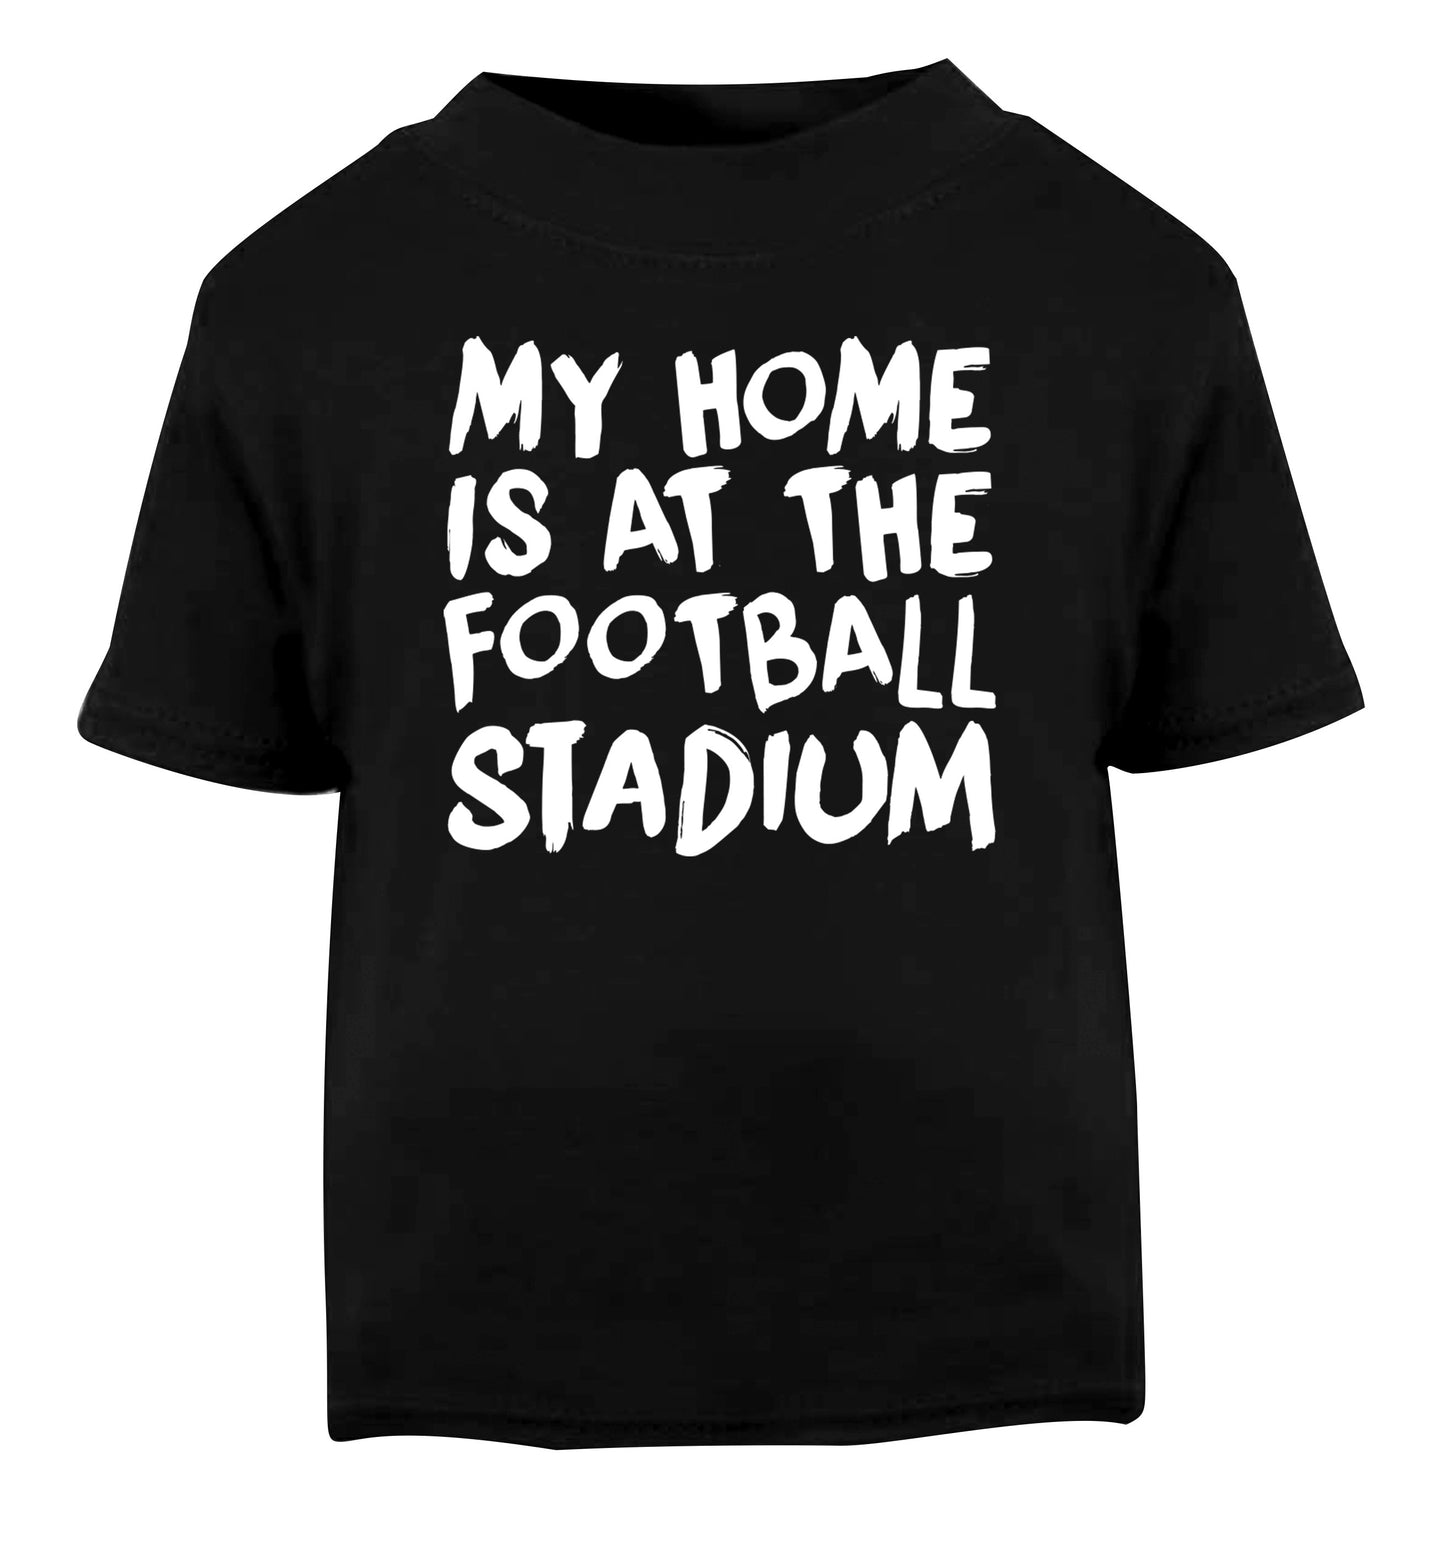 My home is at the football stadium Black Baby Toddler Tshirt 2 years